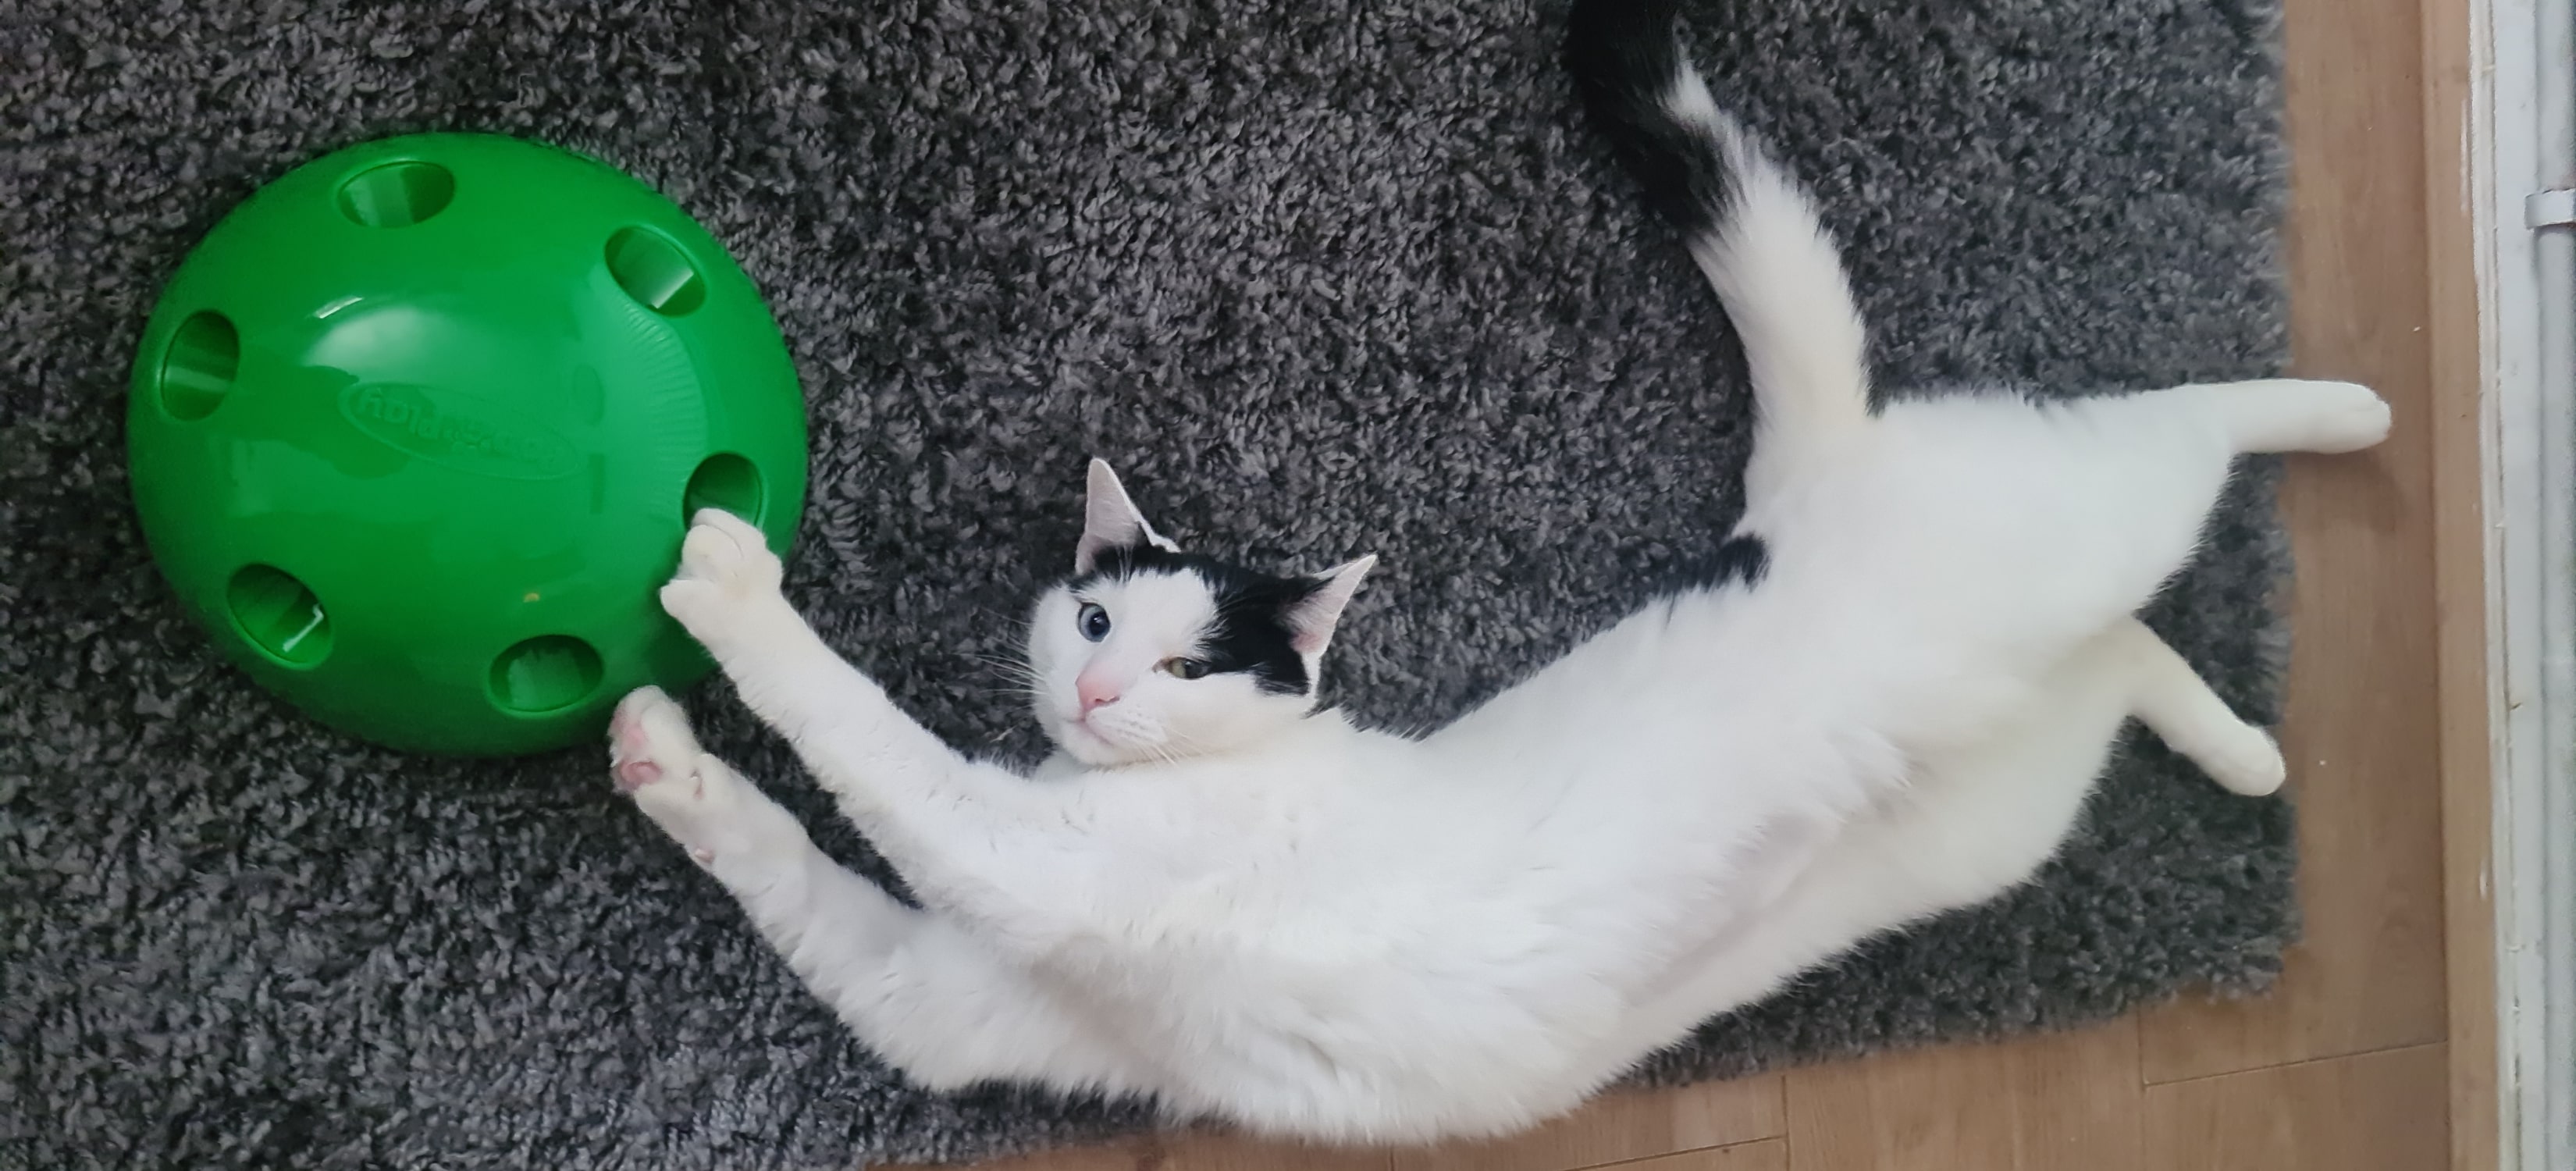 Irwin recovered playing with a green cat toy